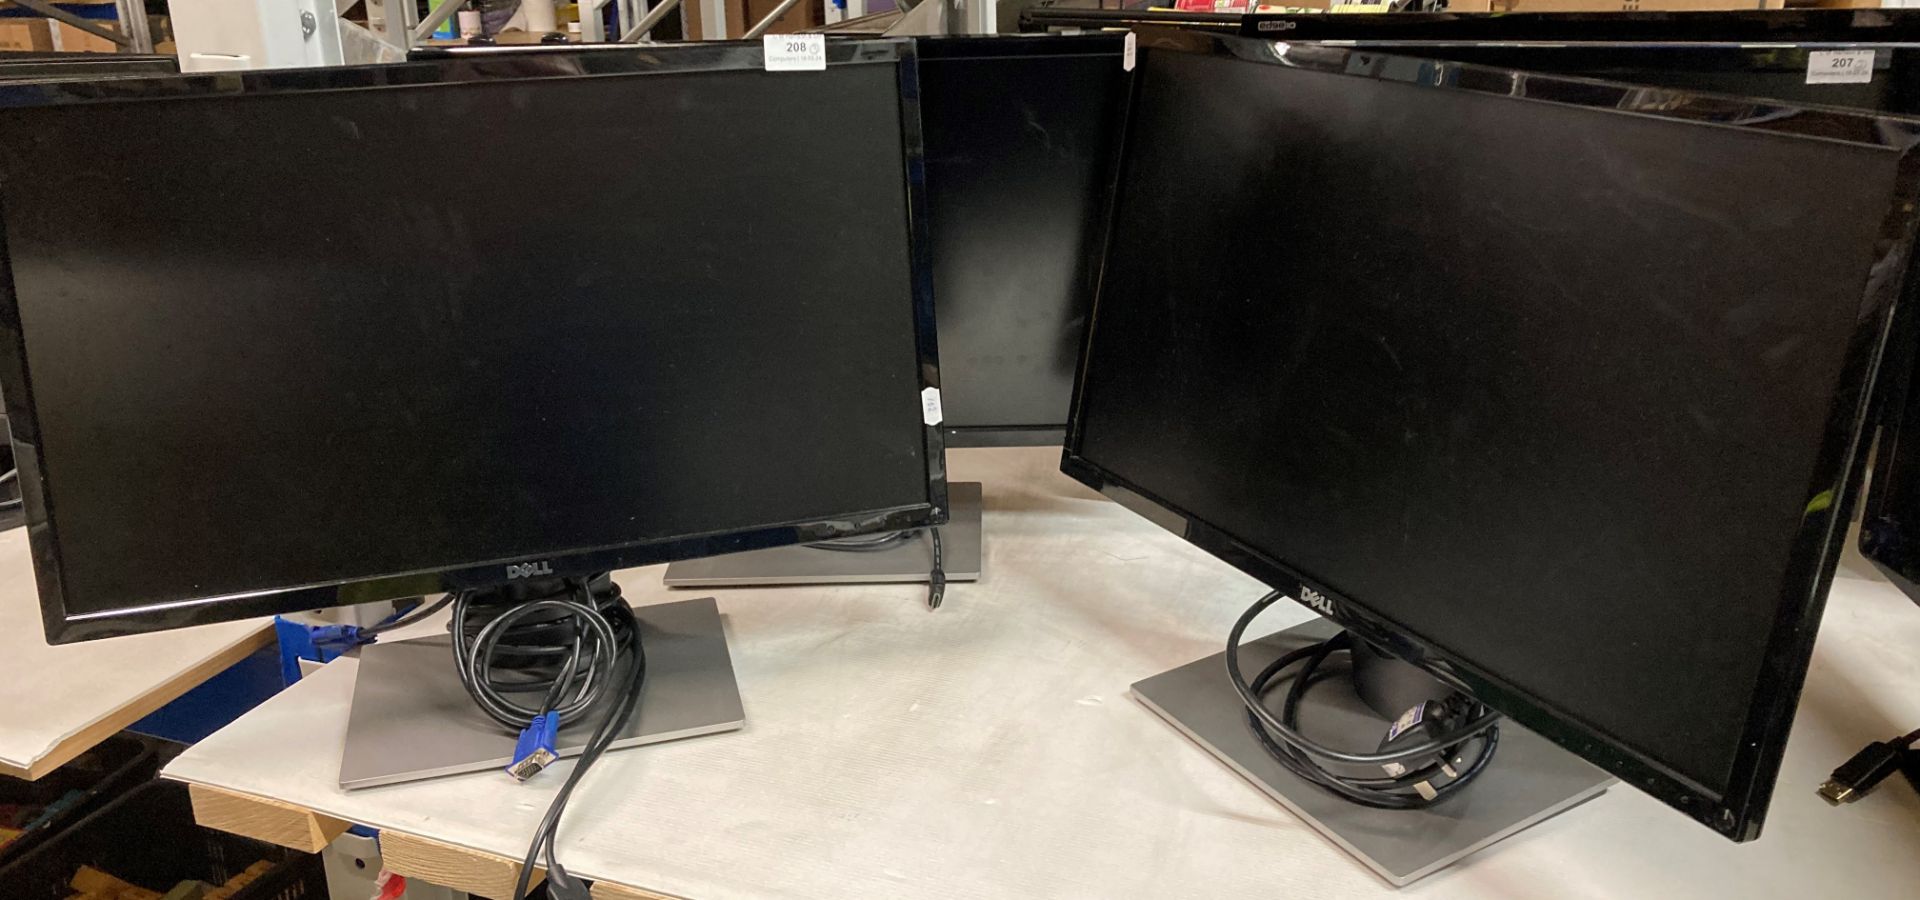 3 x 24" Dell computer monitors with power leads (saleroom location: G11)